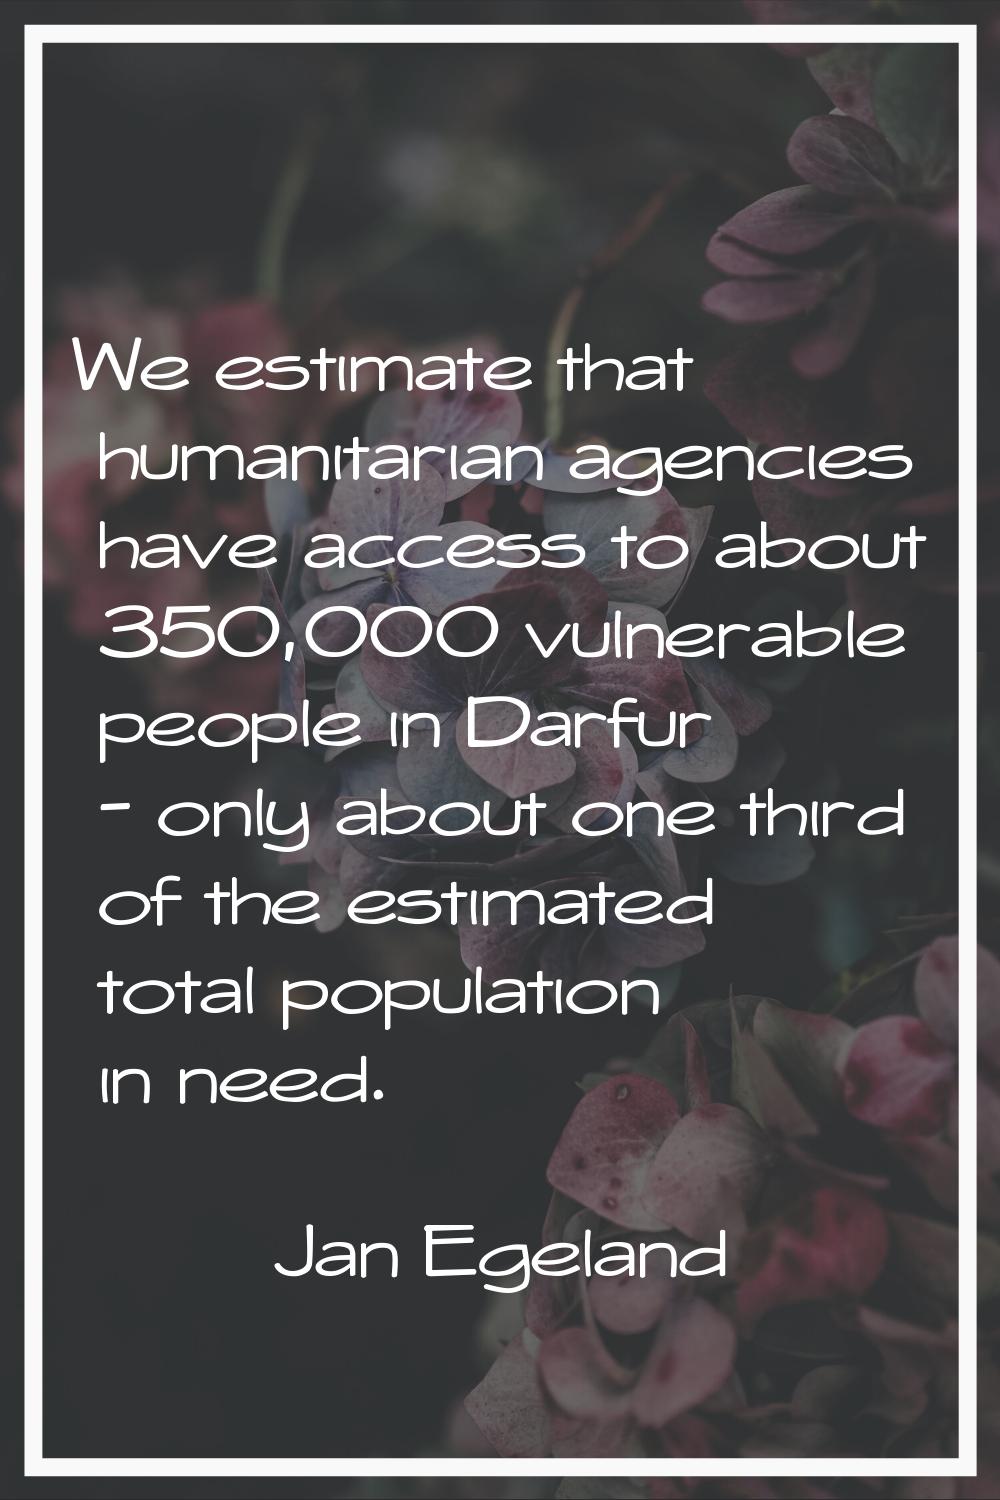 We estimate that humanitarian agencies have access to about 350,000 vulnerable people in Darfur - o